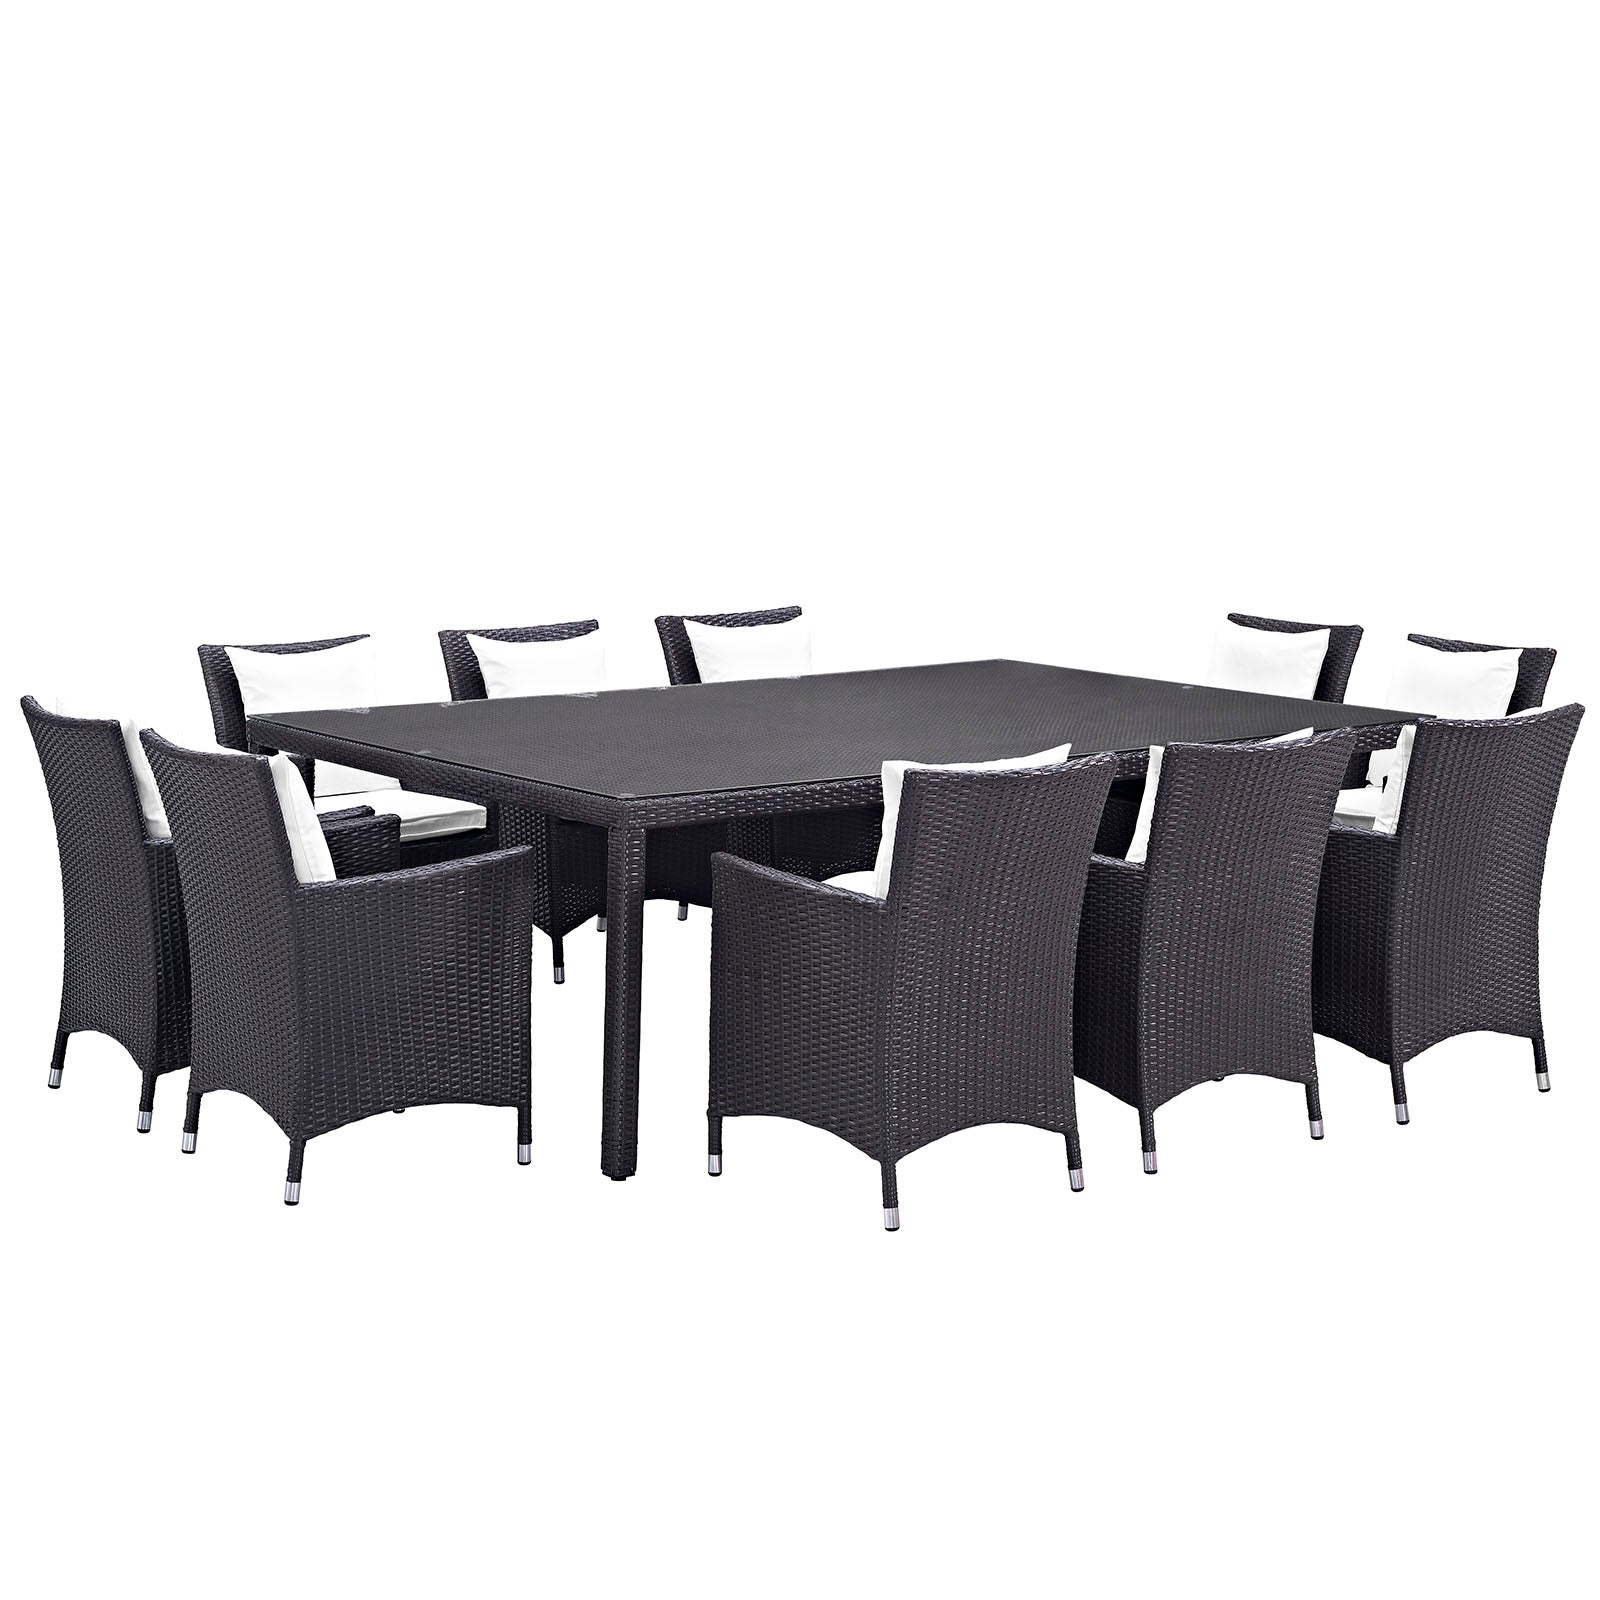 Convene 11 Piece Outdoor Patio Dining Set - East Shore Modern Home Furnishings